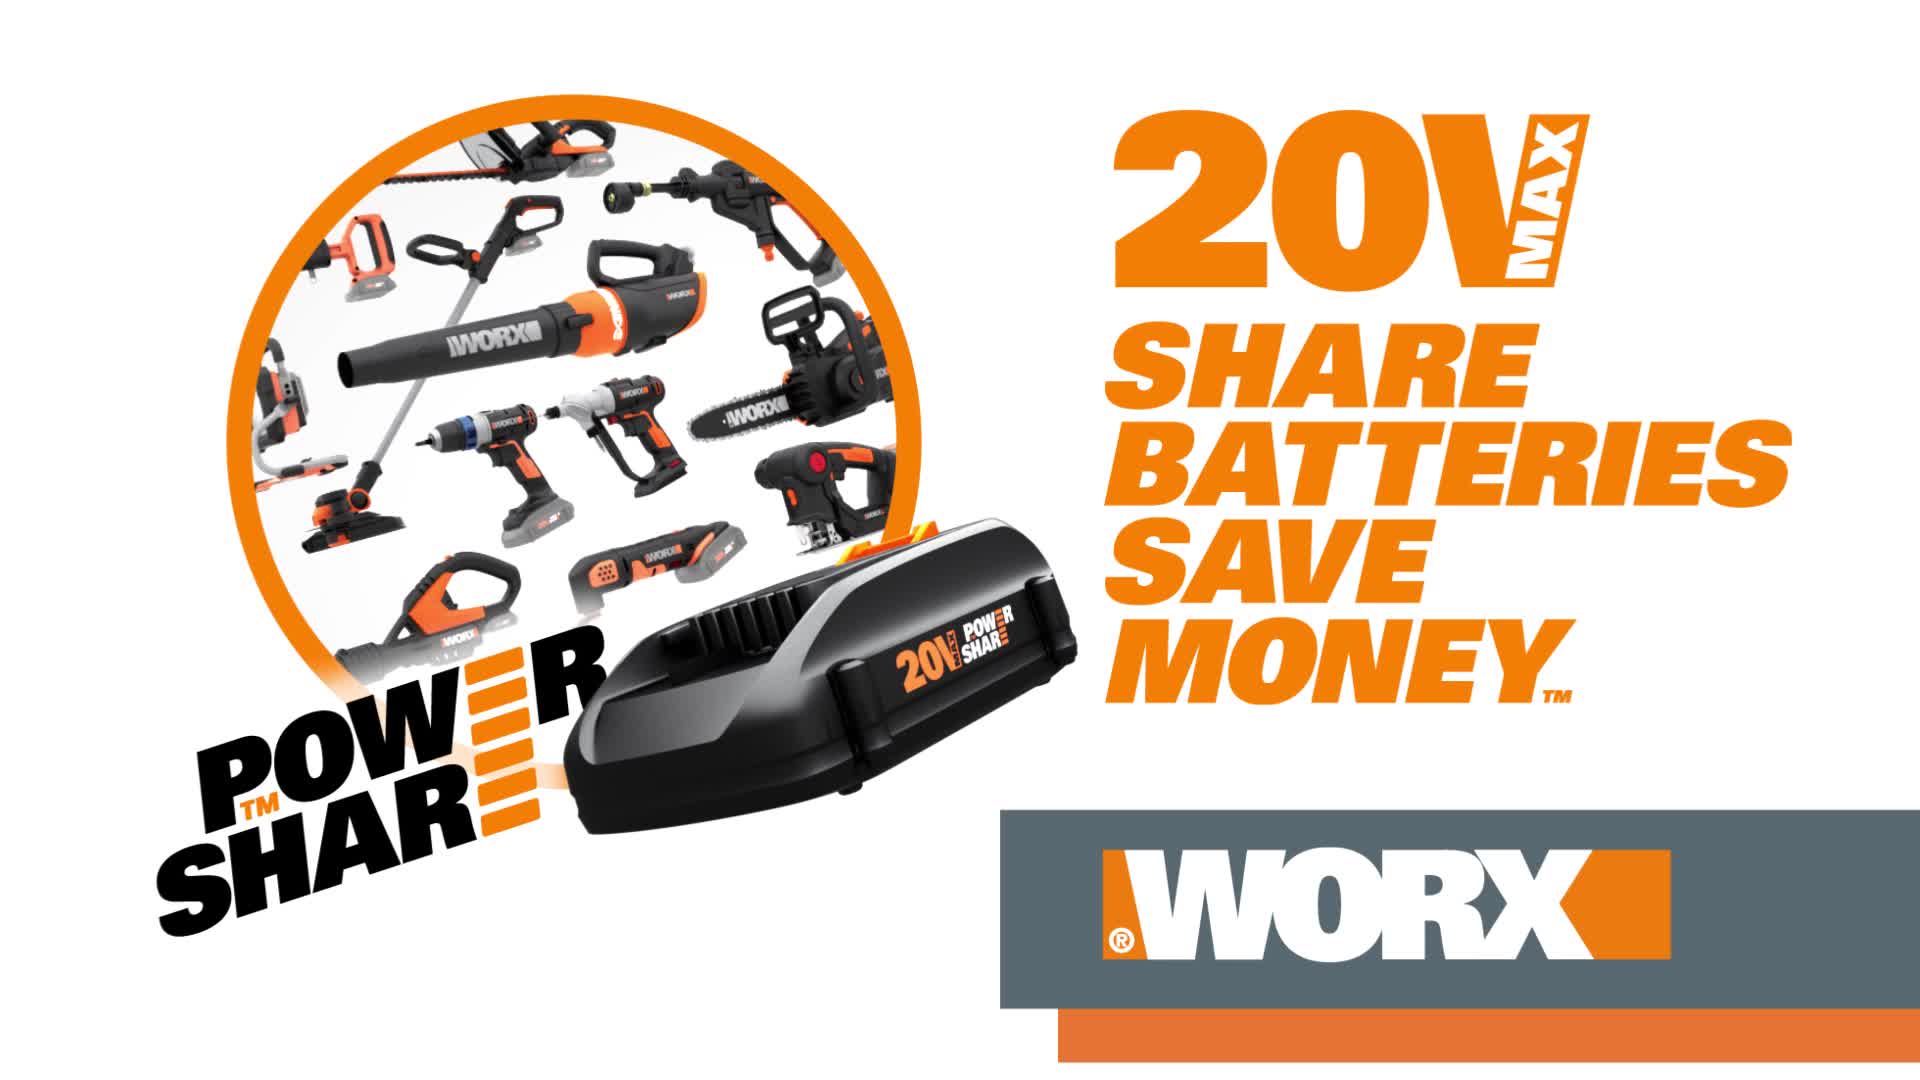 WORX Power Share Gt 20-volt Max 12-in Straight Cordless String 